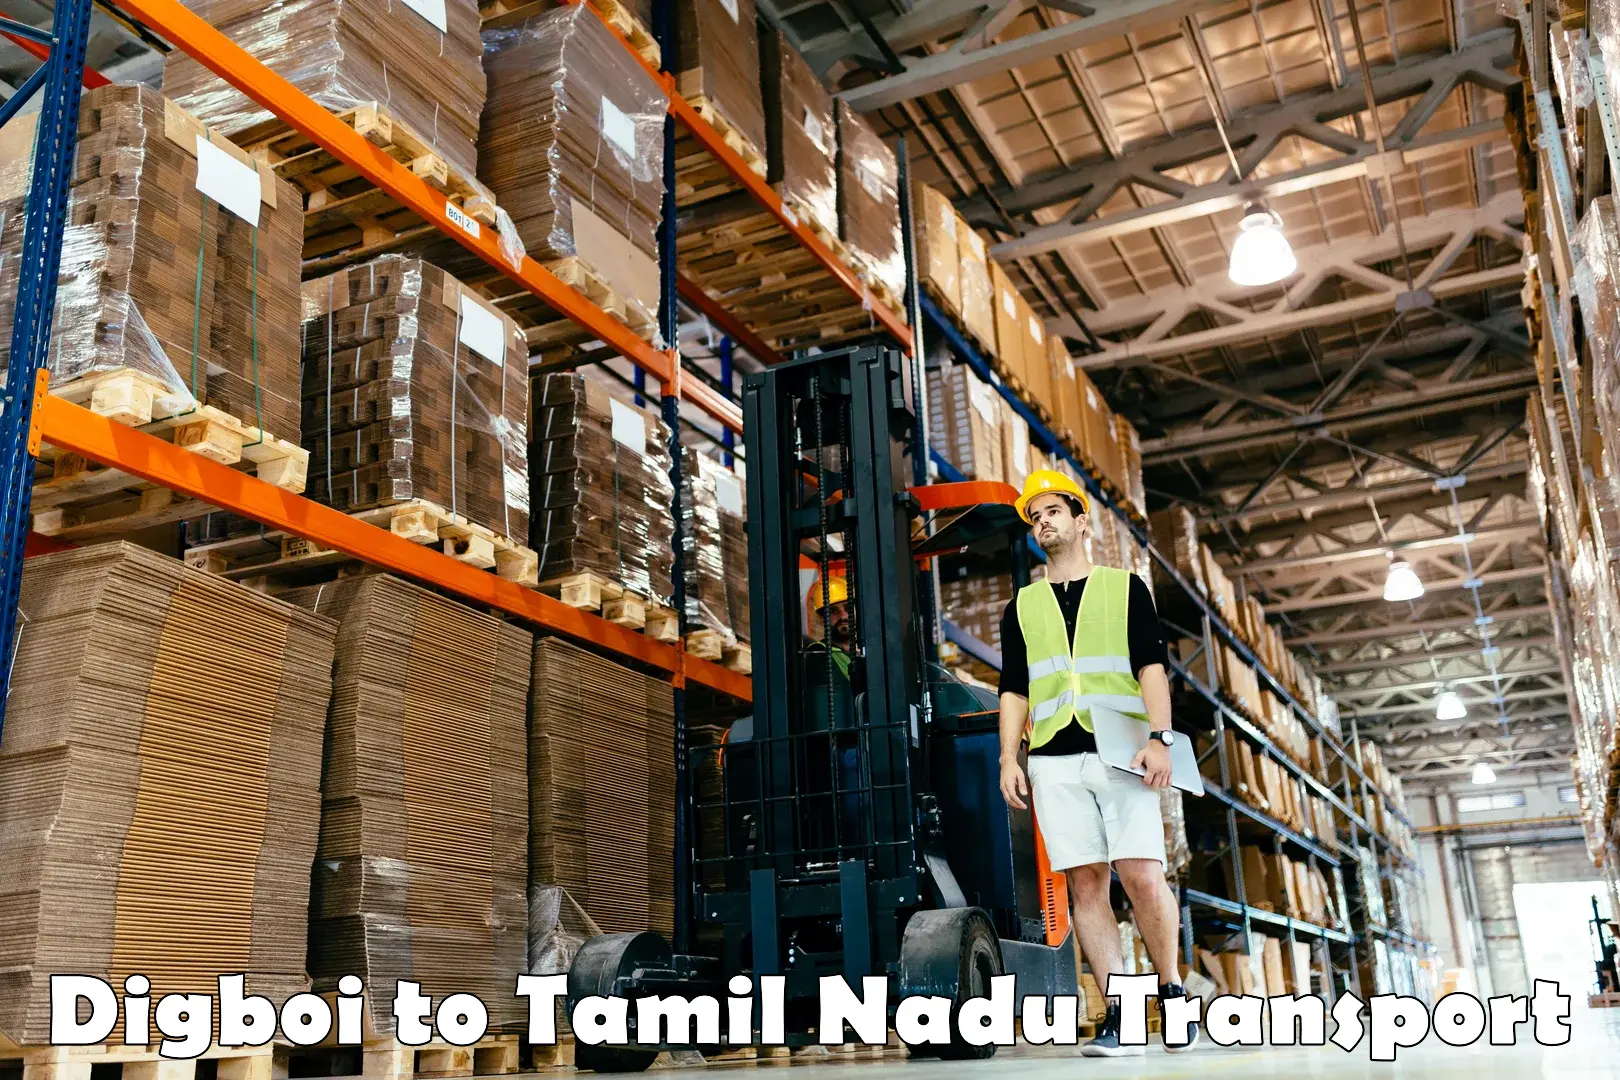 Goods delivery service Digboi to Tamil Nadu